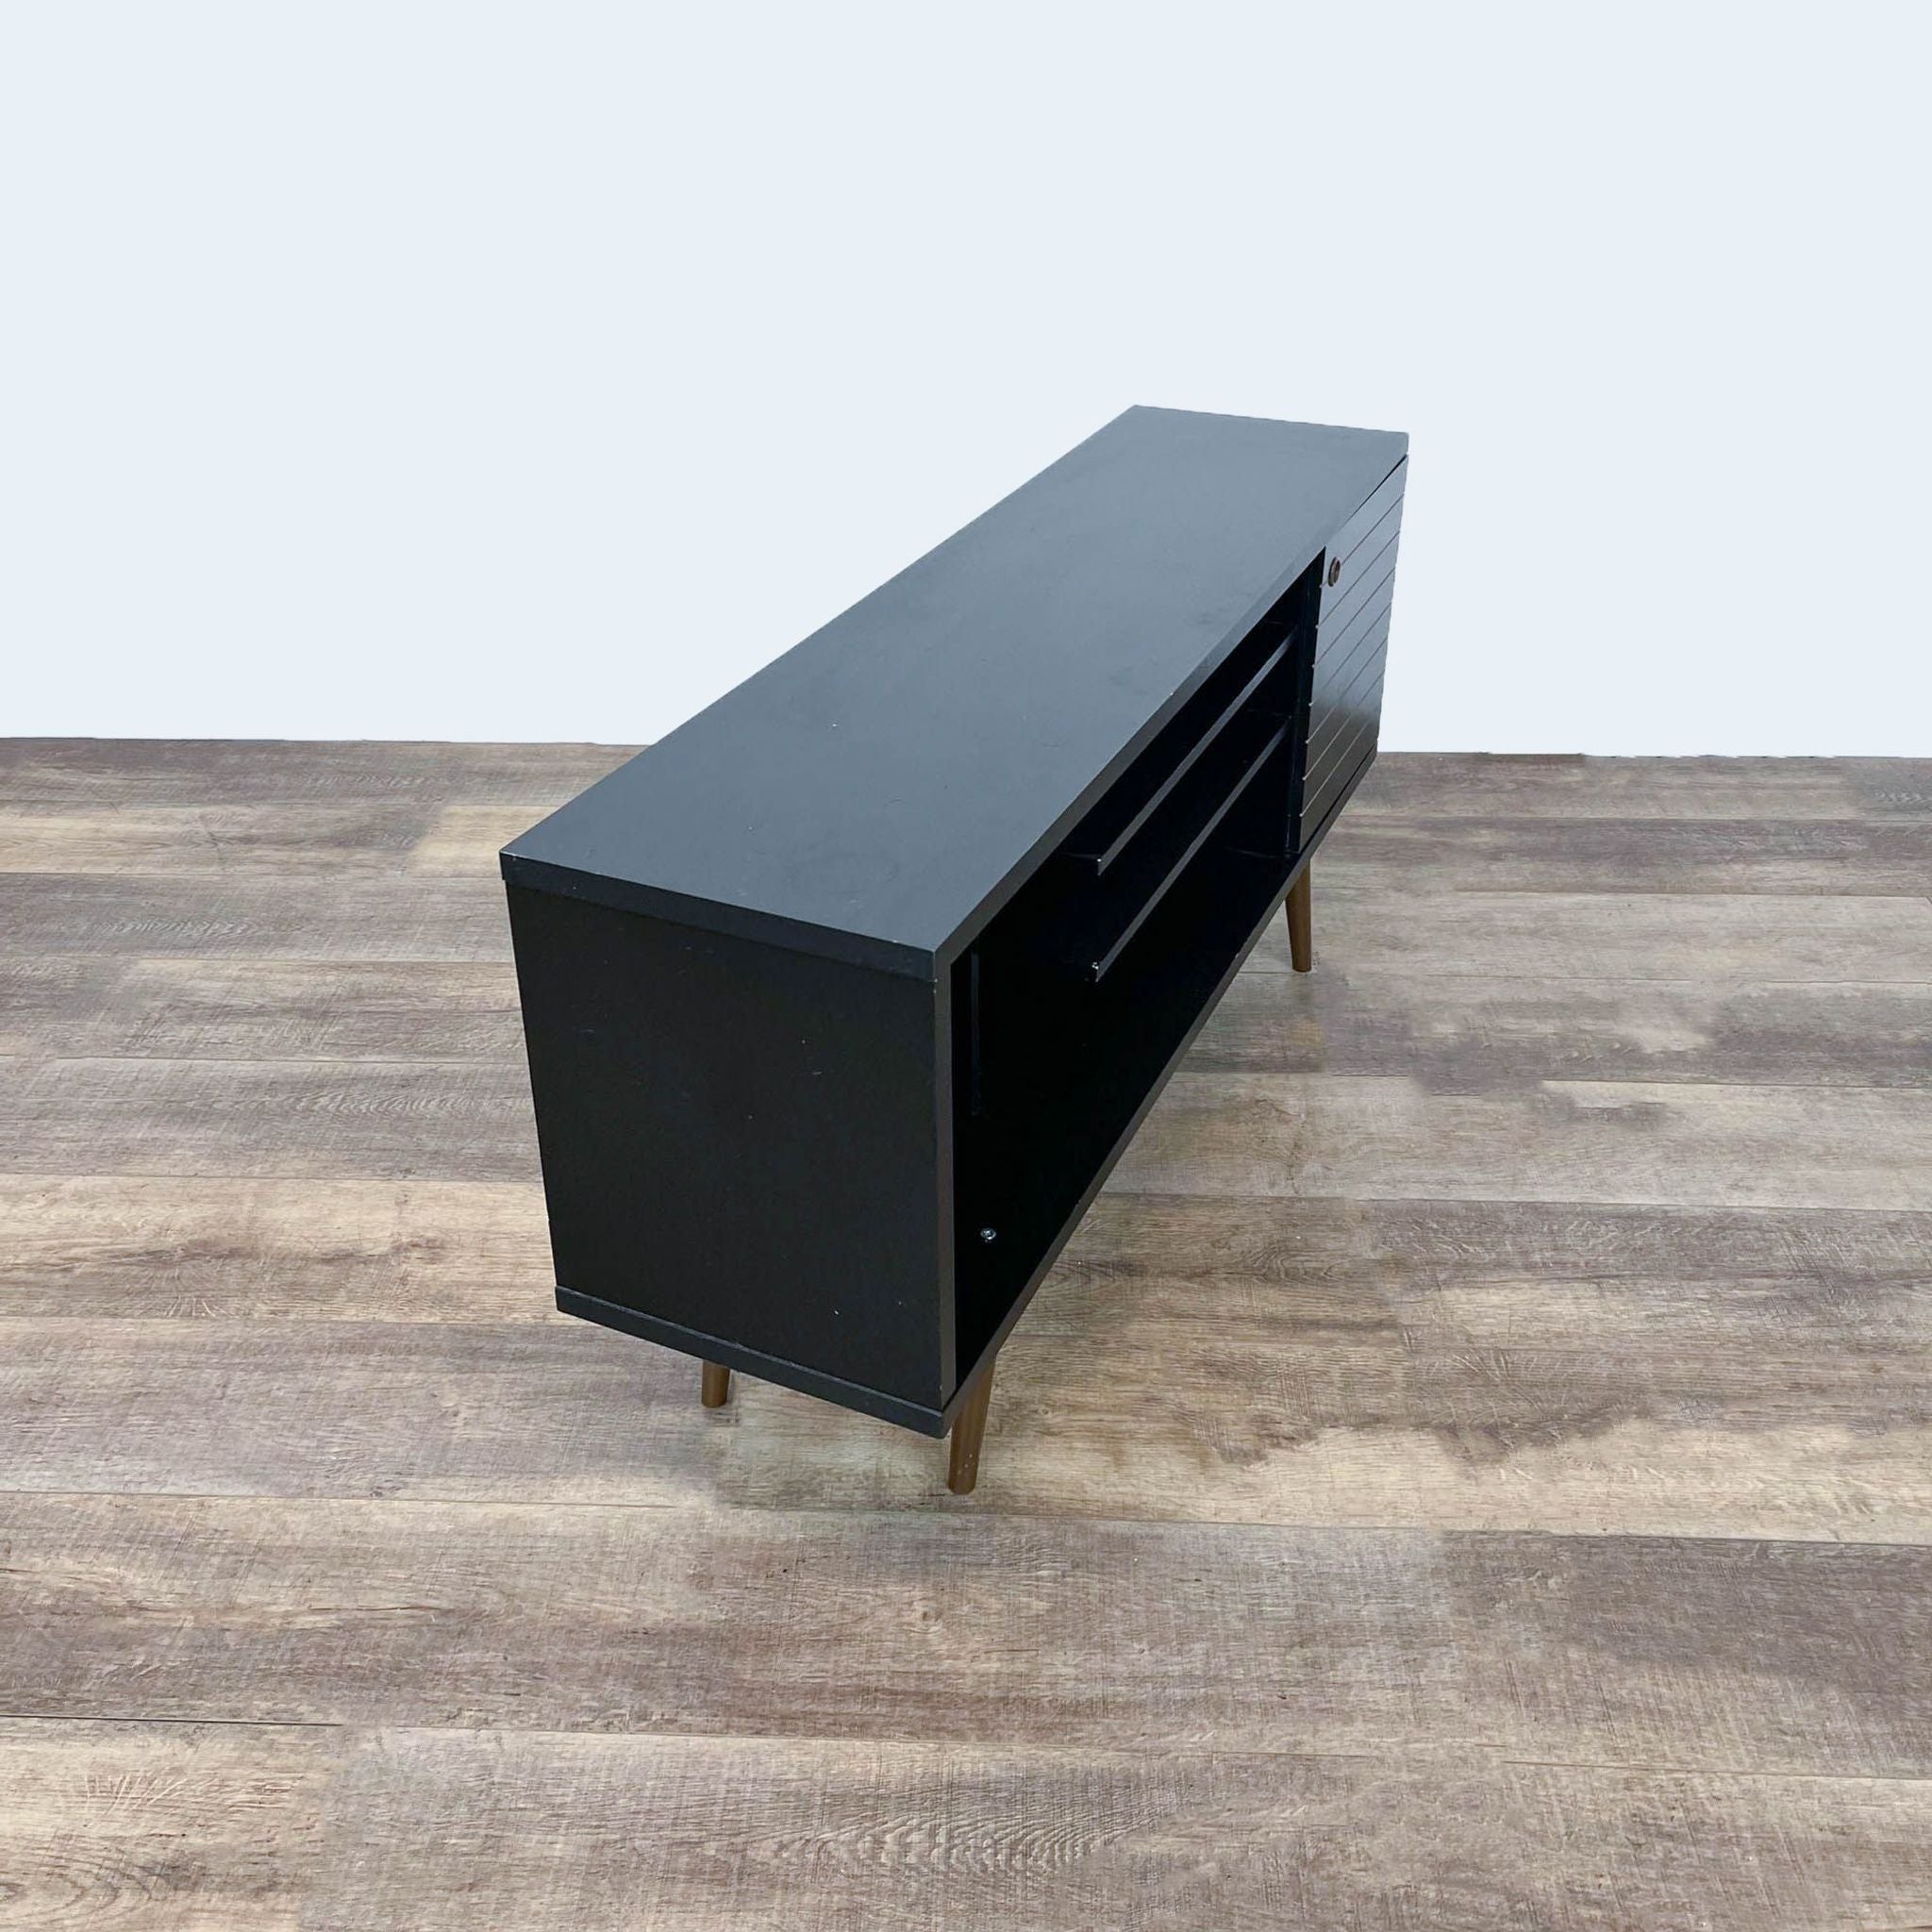 Black Reperch entertainment center with open drawers on a wooden floor.